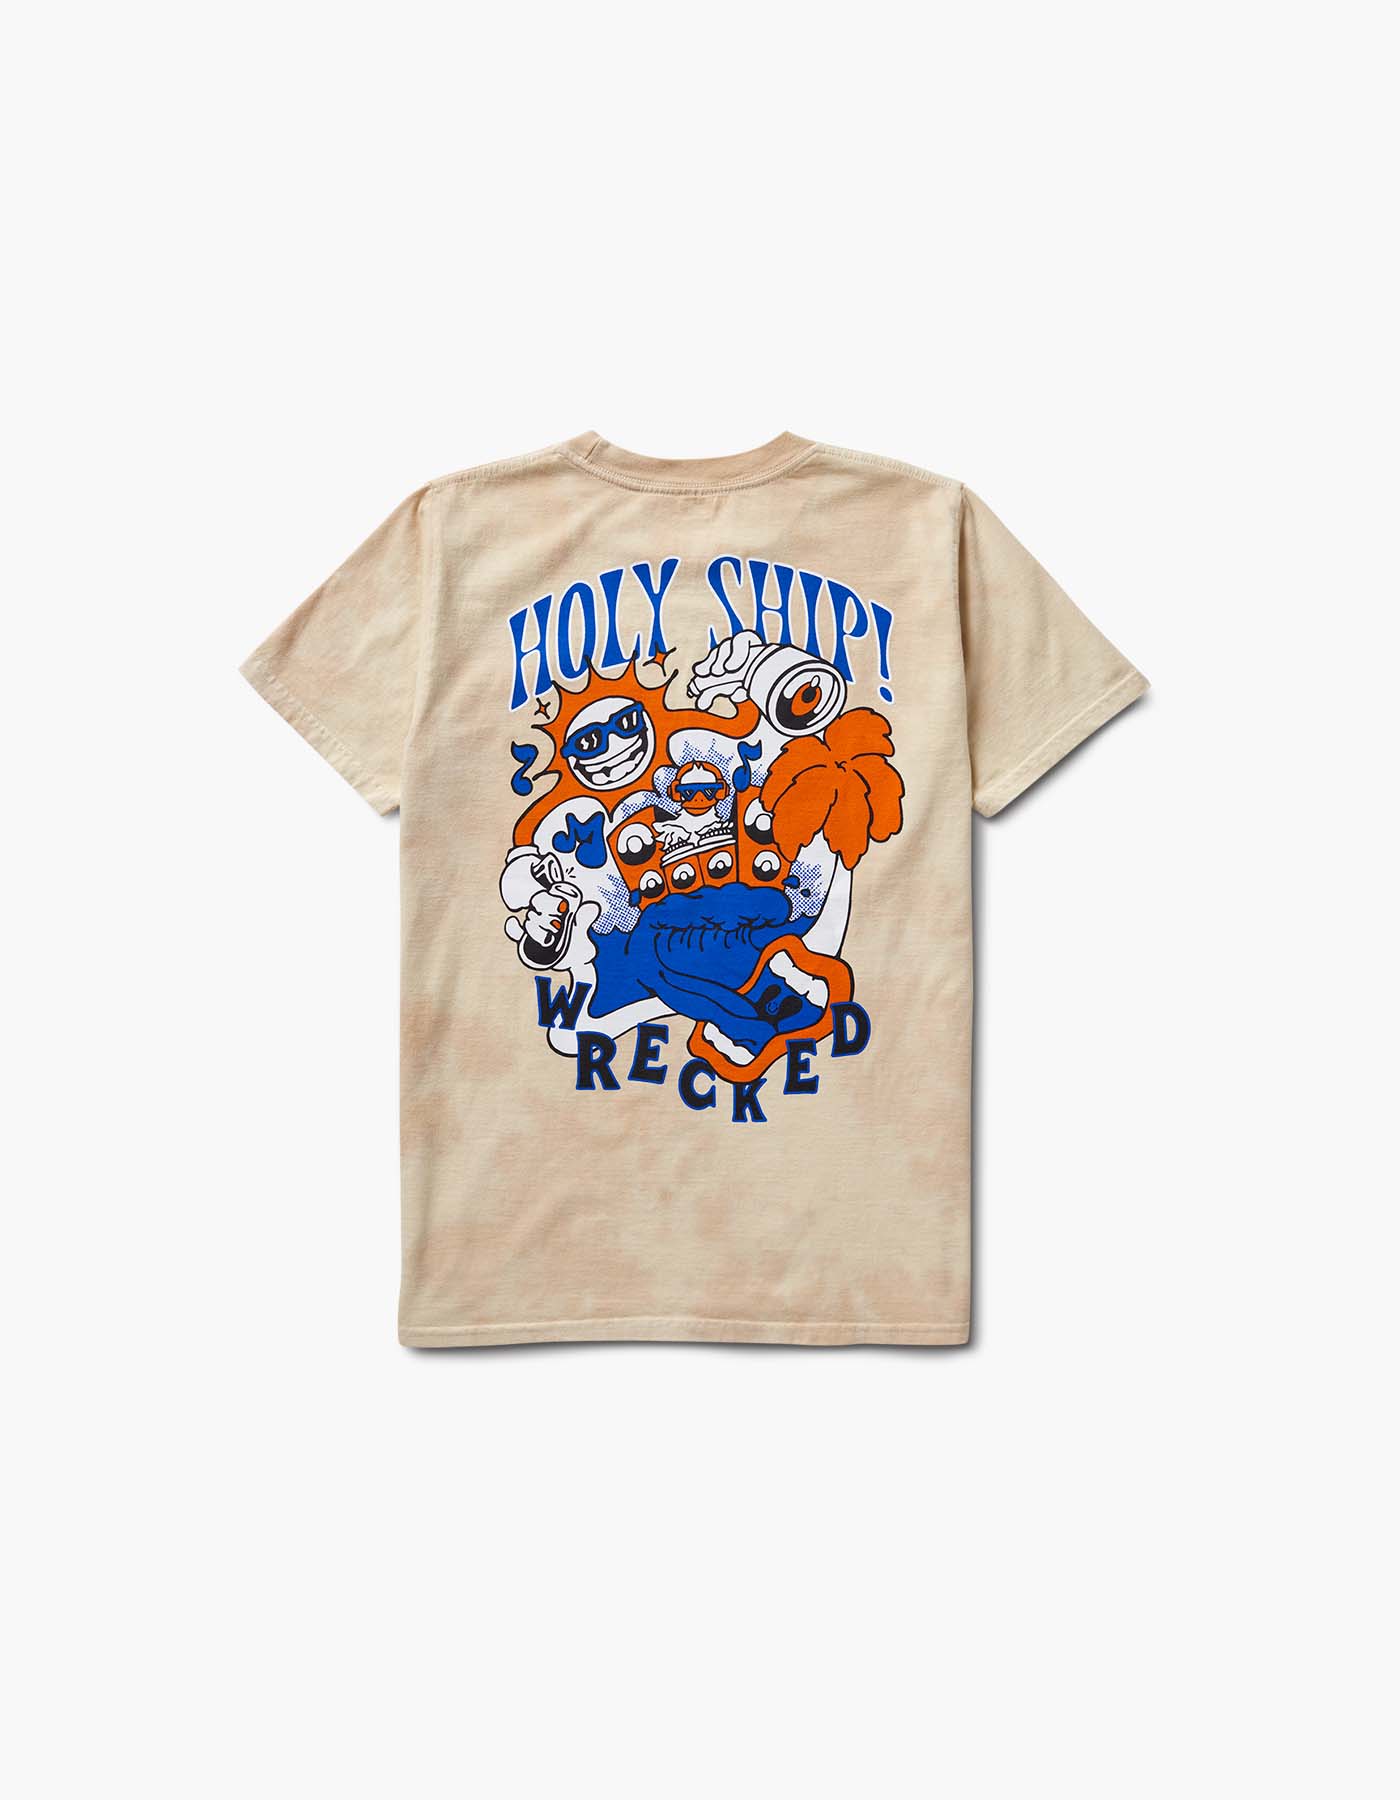 Holy Ship! Wrecked Pool Deck S/S Tee